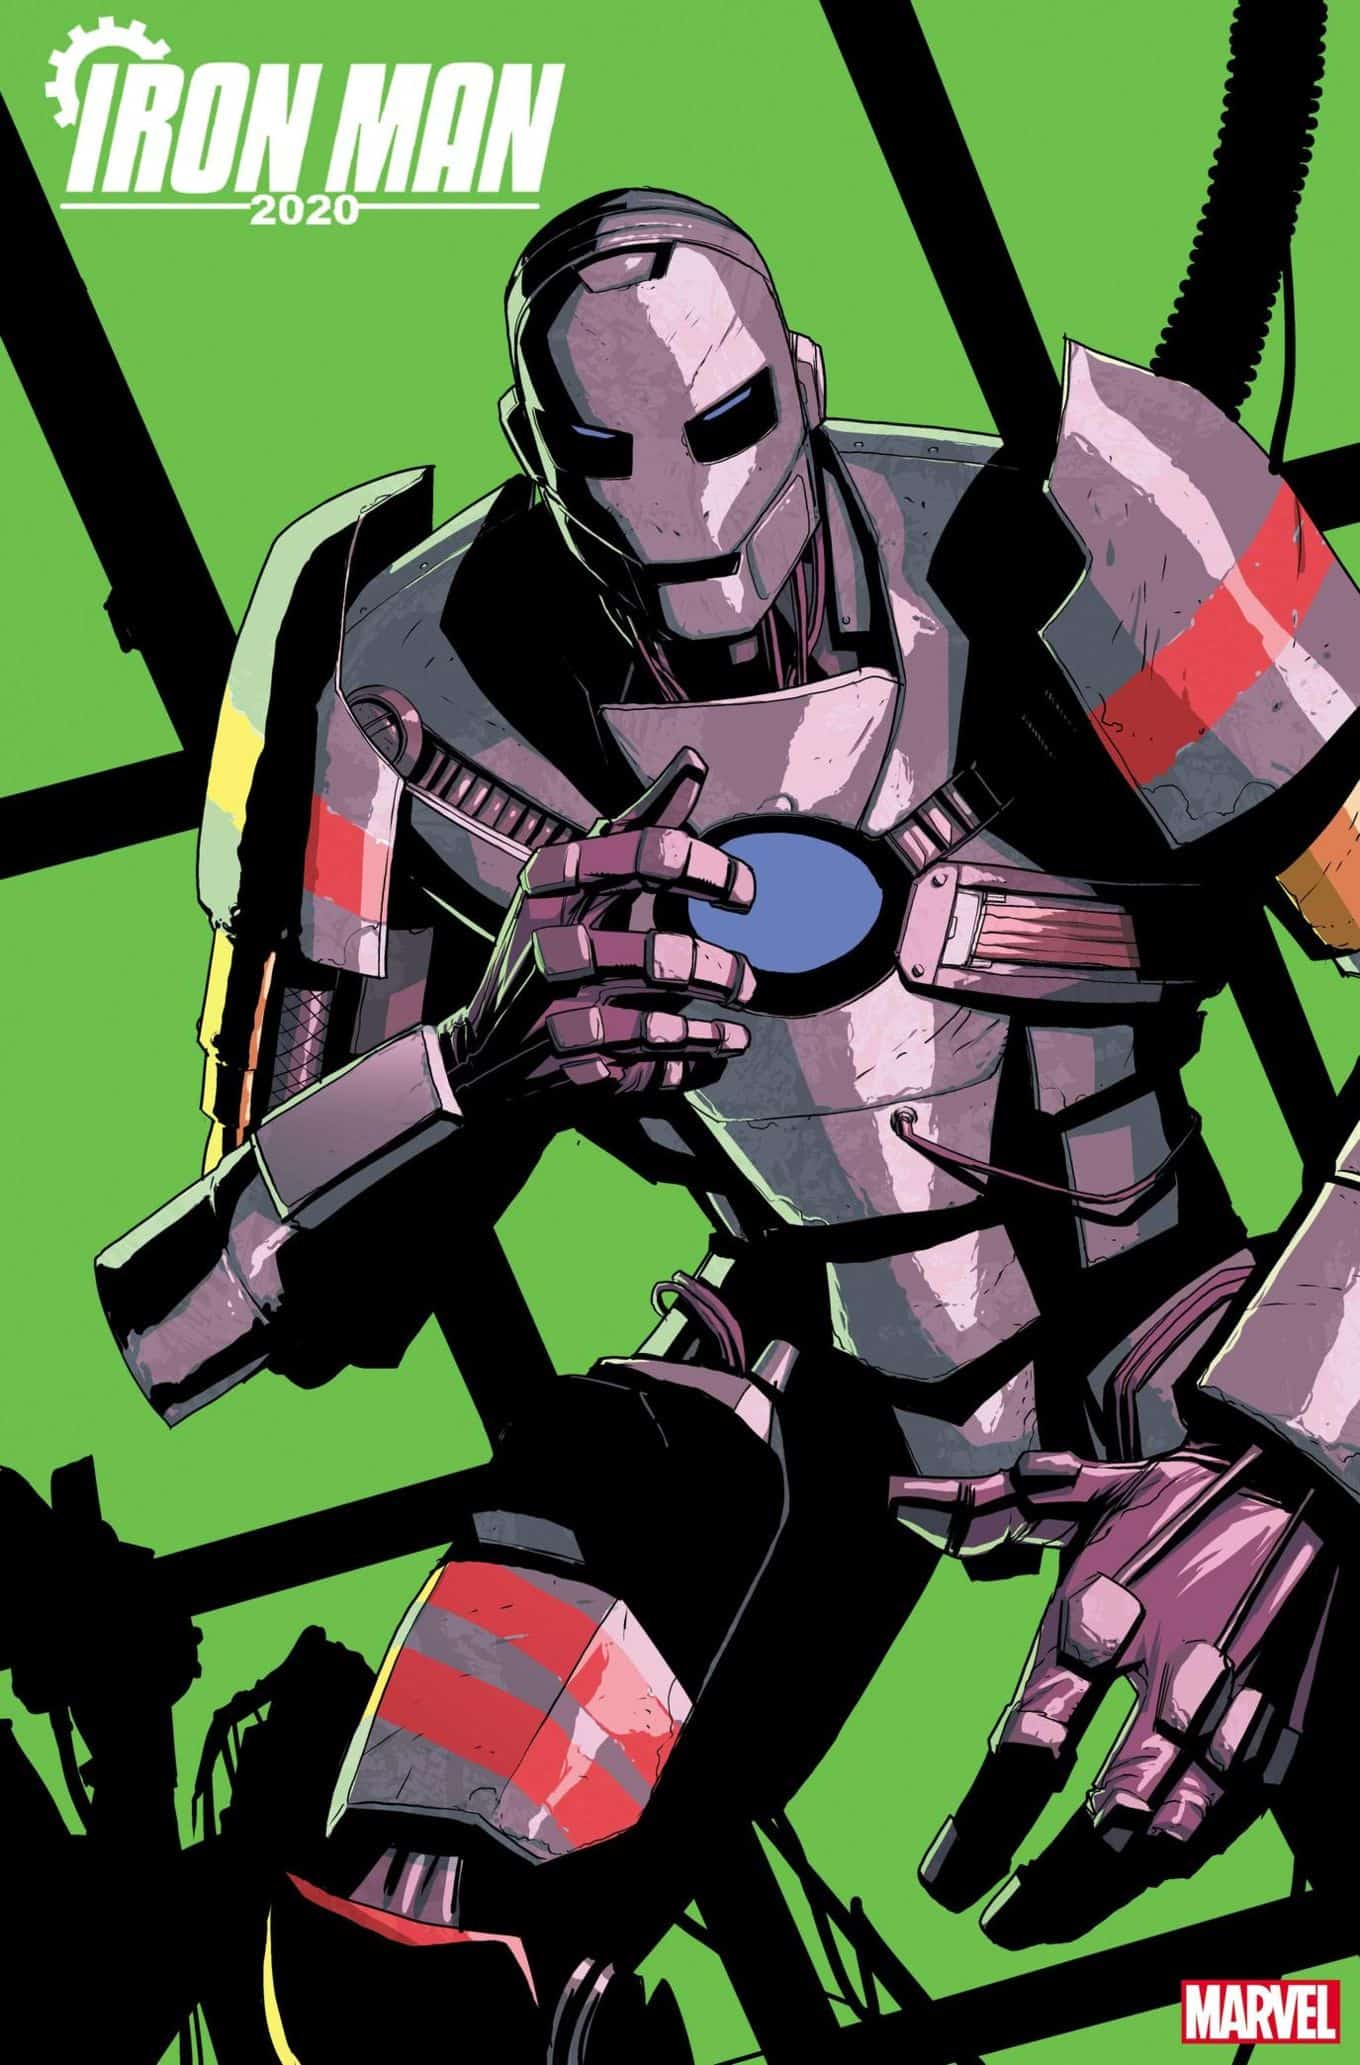 NYCC 2019, Marvel Comics Universe & January 2020 Solicitations Spoilers: New Iron Man 2020 